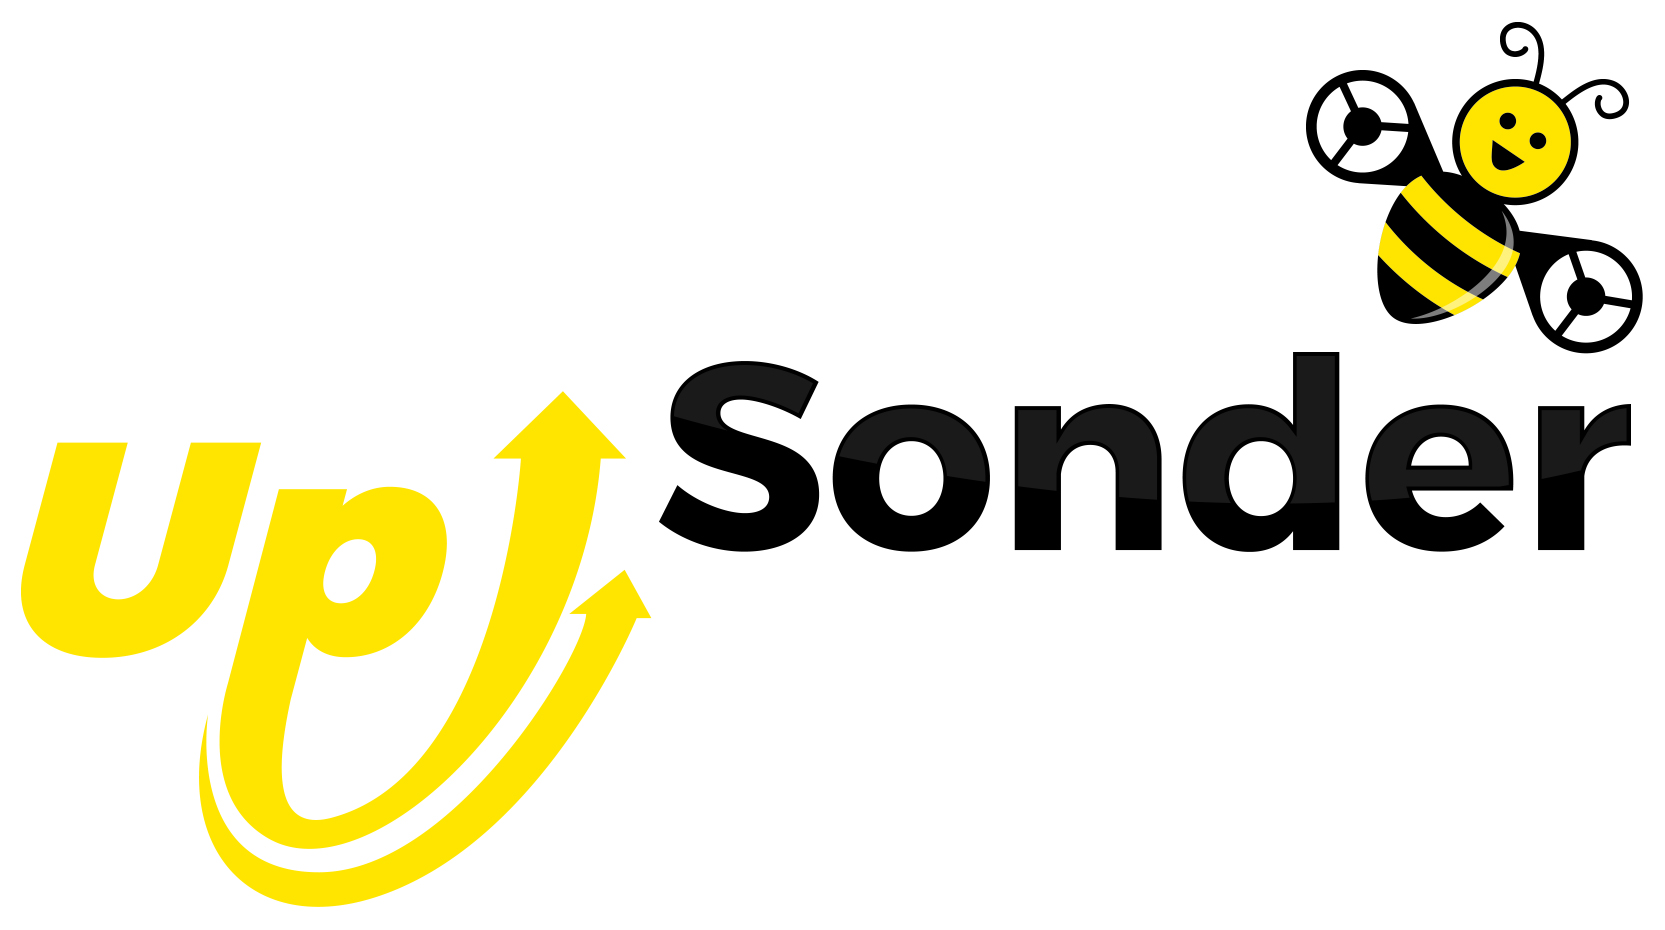 Meet Up Sonder, the first on-demand drone marketplace for the commercial industry and the everyday person – Livedronenews.com – January 24, 2017